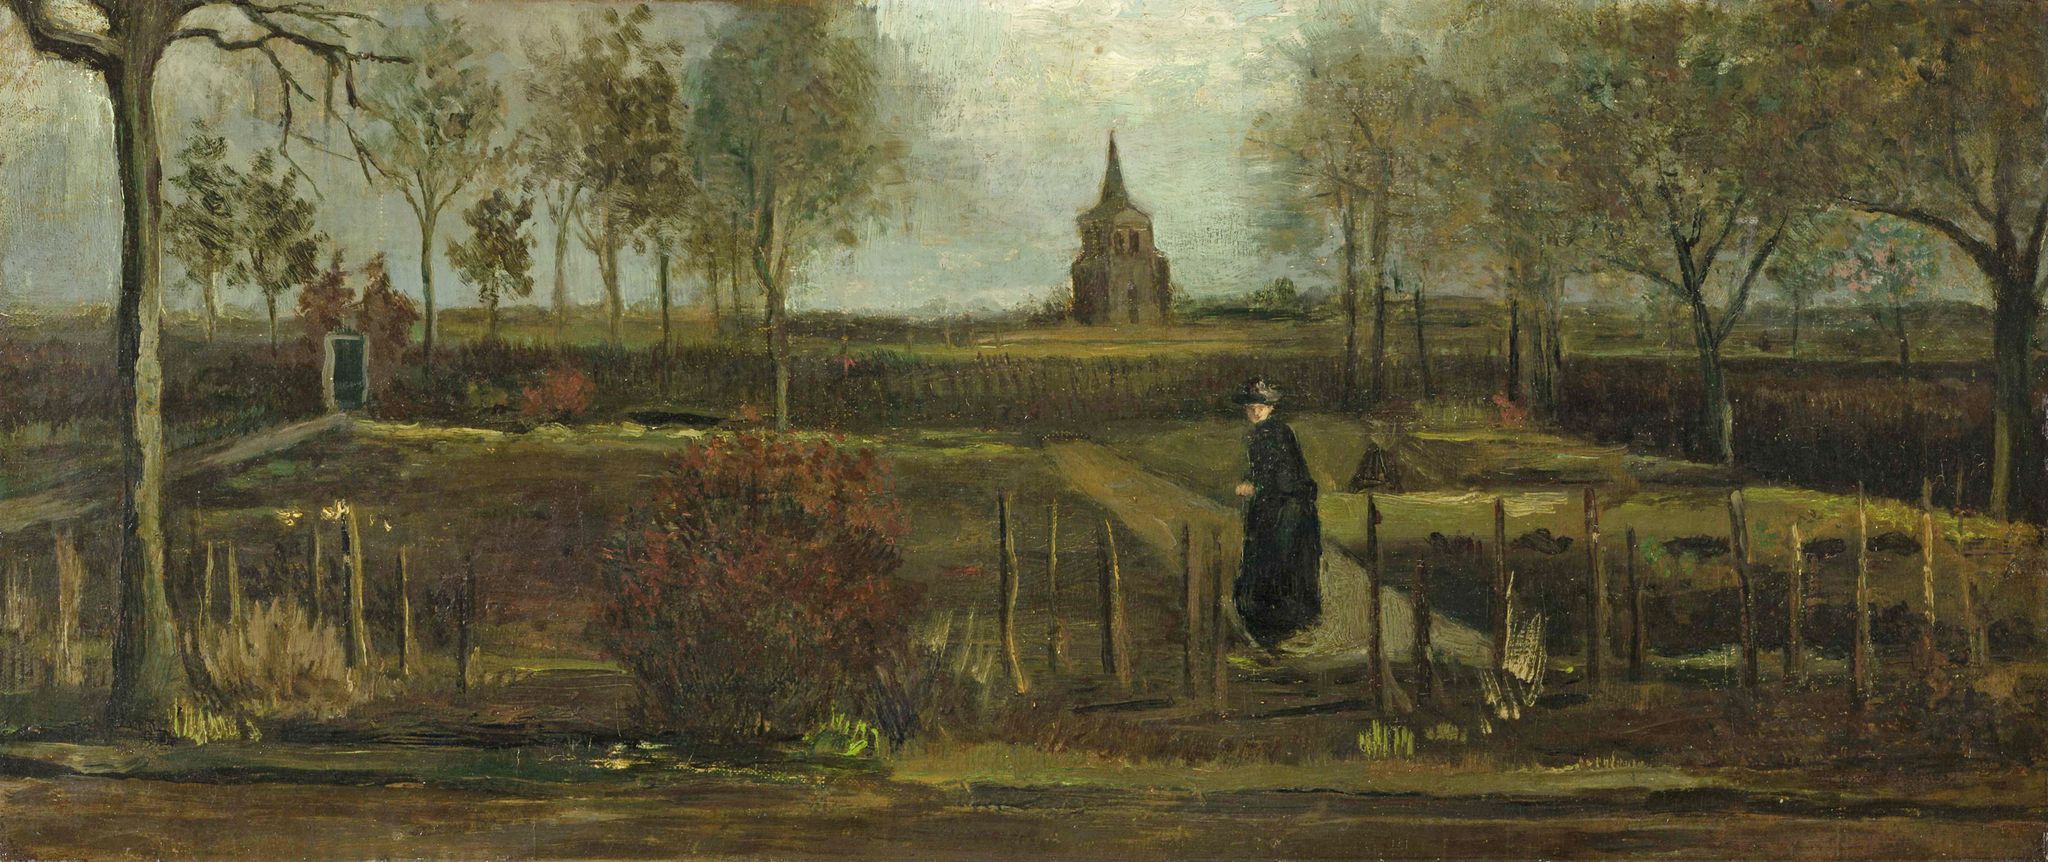 van gogh's the parsonage garden at nuenen in spring , stolen from singer laren museum in the netherlands during  a covid19 closure in 2020